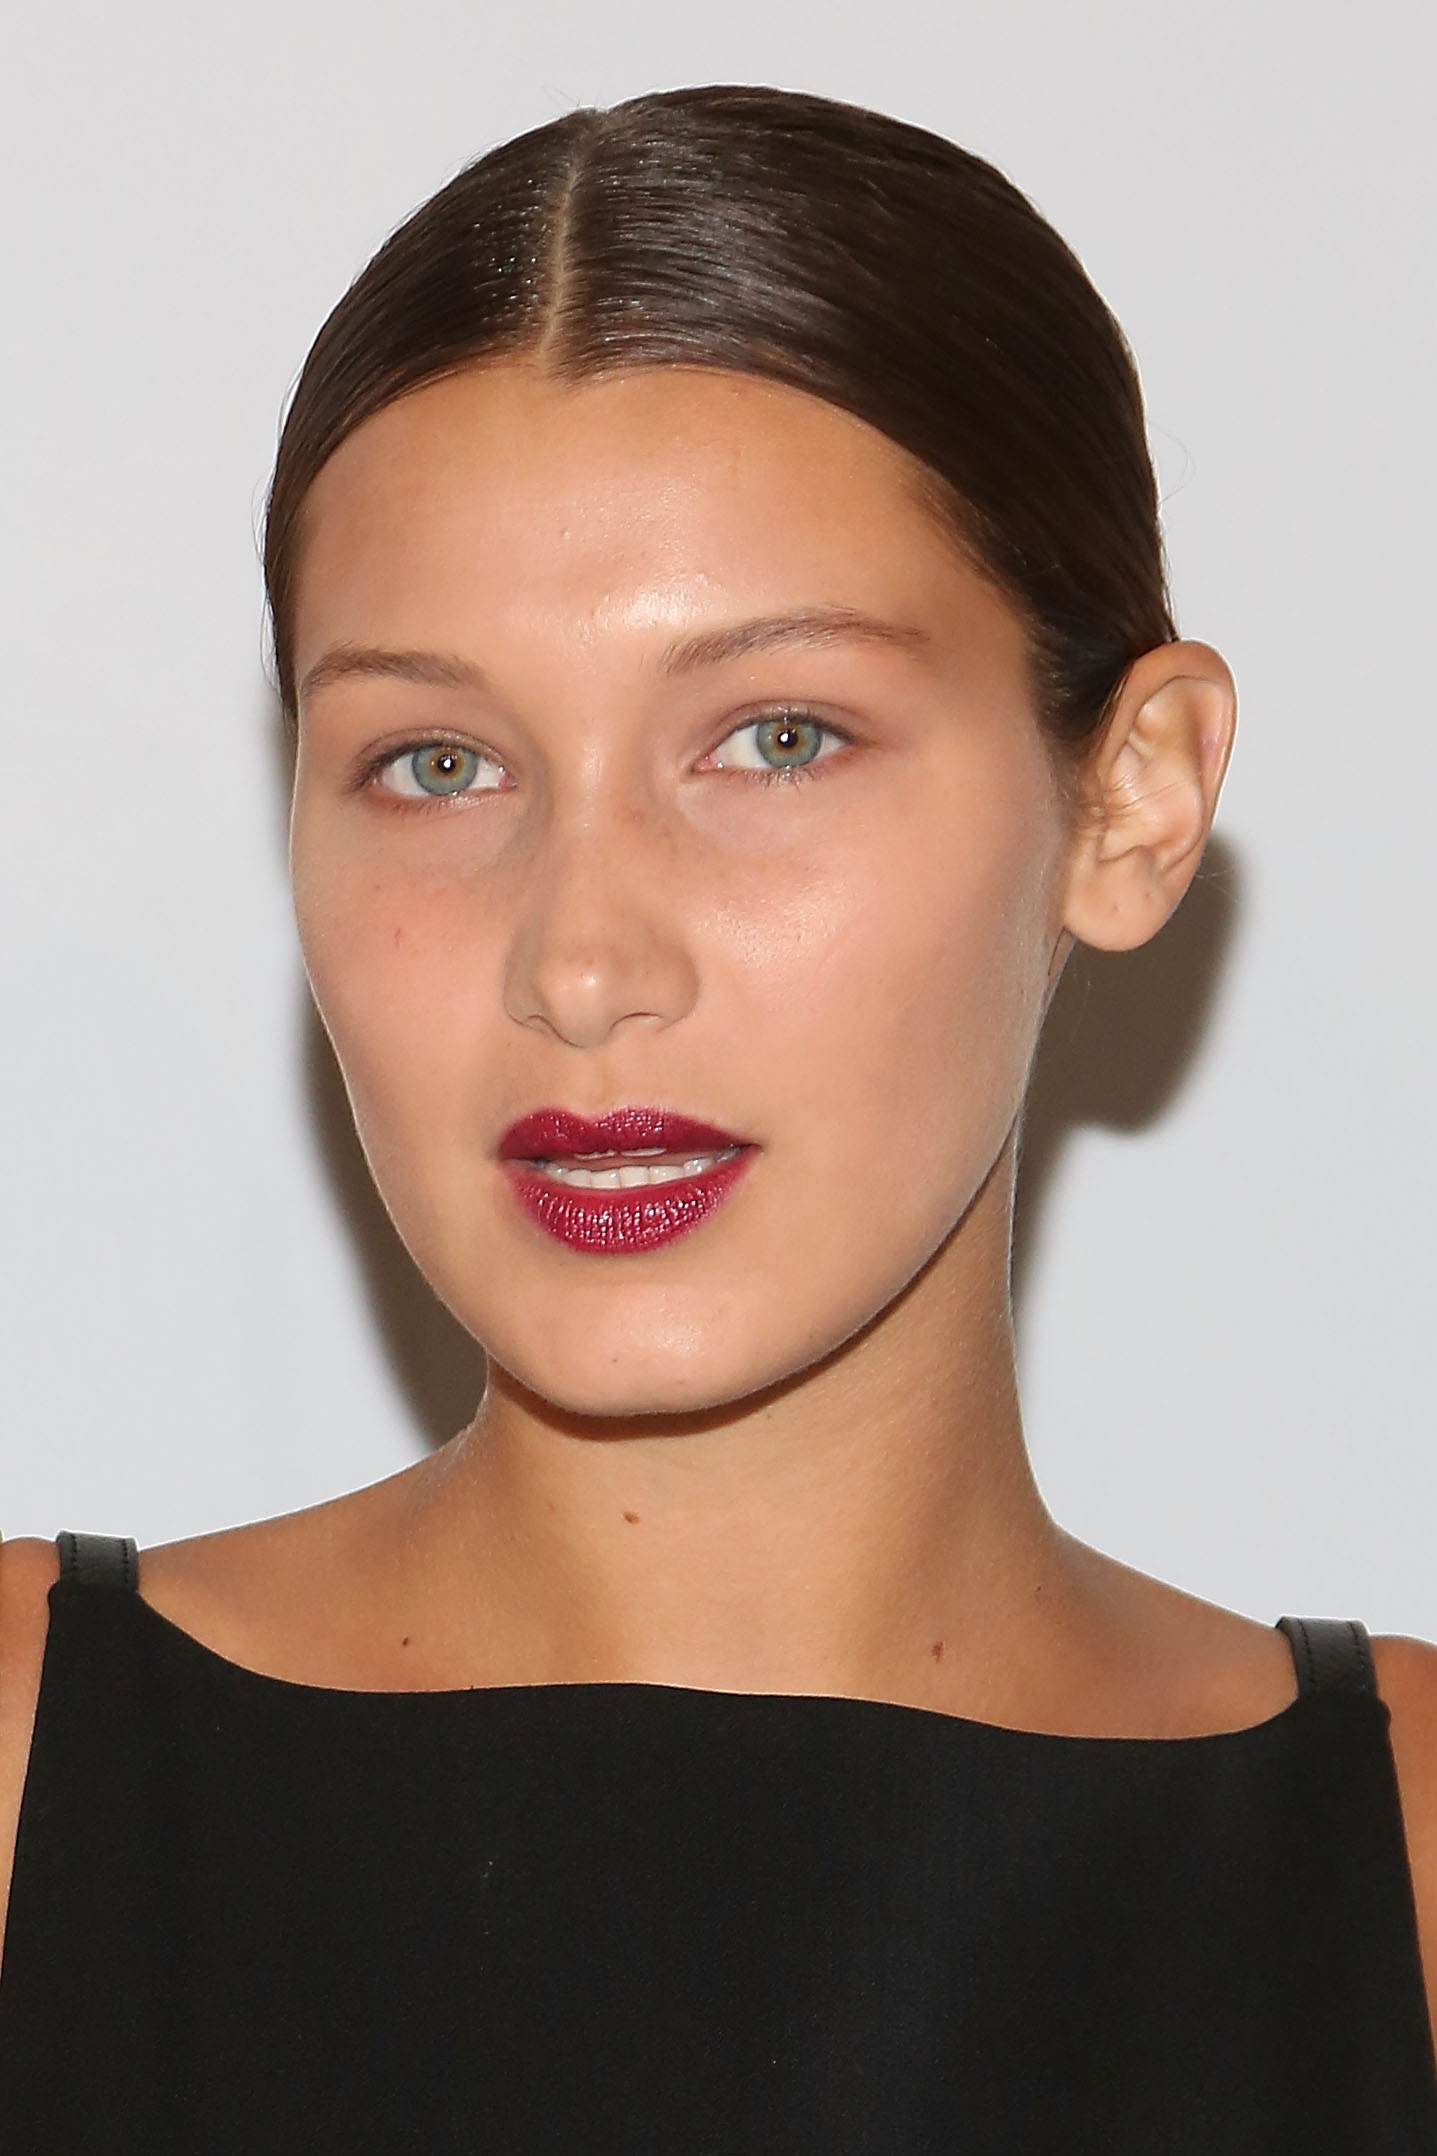 Bella Hadid at the REVEAL Calvin Klein Fragrance launch party in New York City on September 8, 2014 | Source: Getty Images